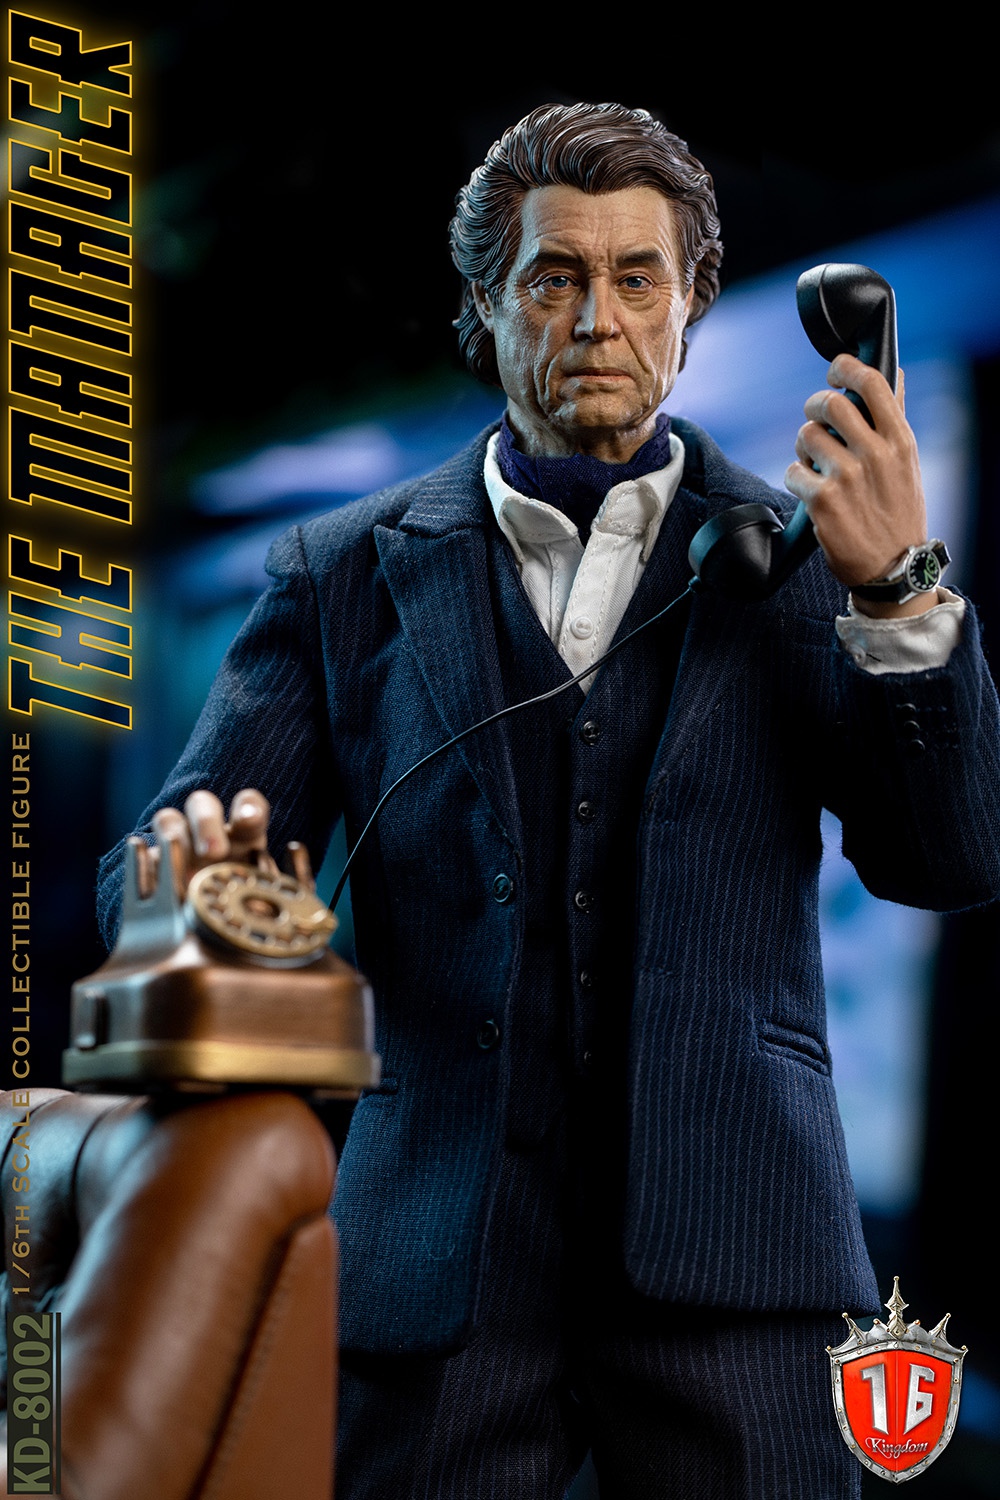 male - NEW PRODUCT: Kingdom: 1/6 The Manager Winston Action Figure KD-8002 11455410